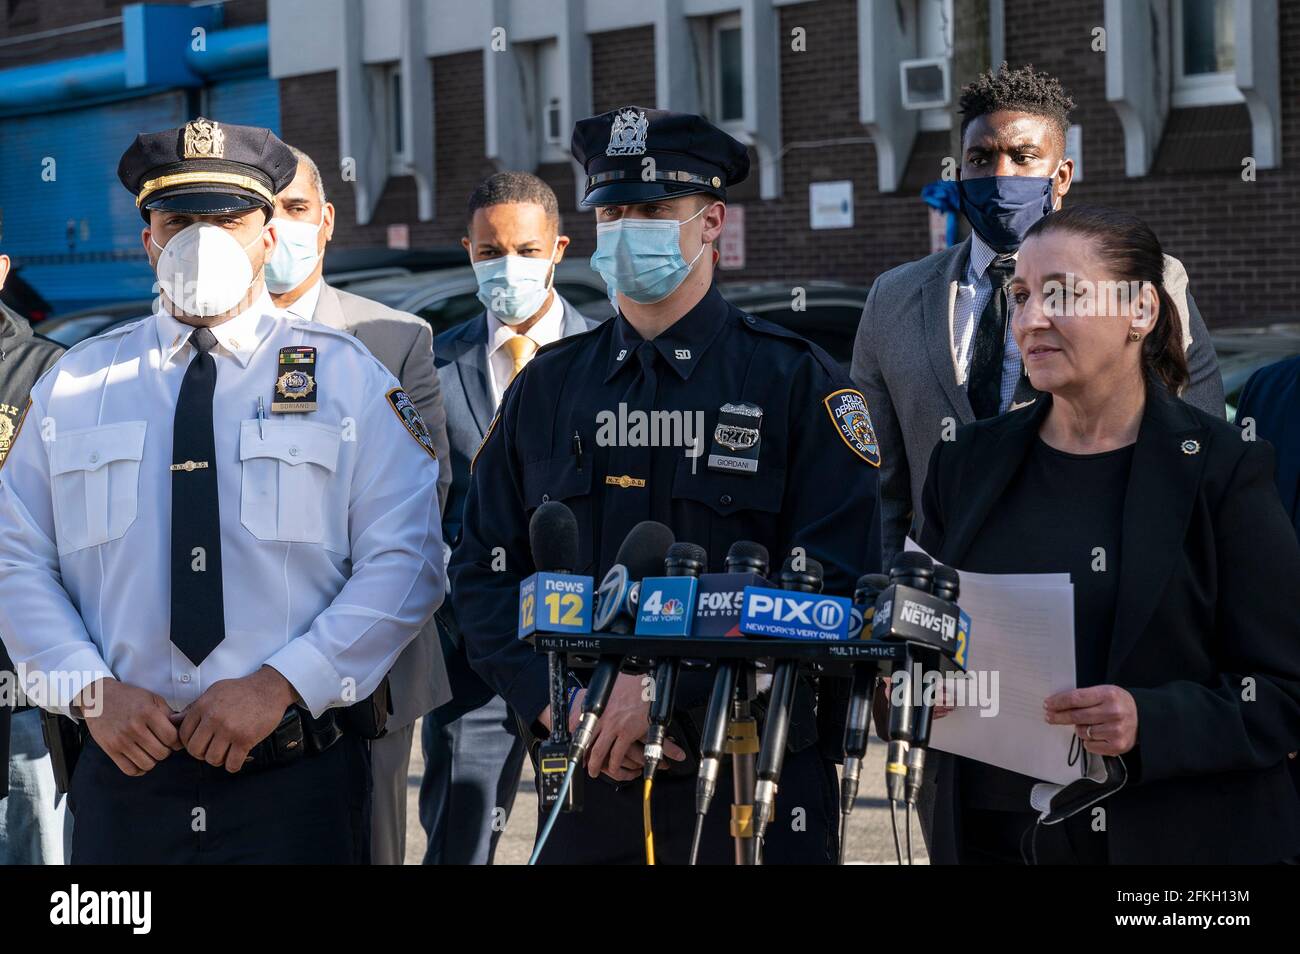 New York, United States. 01st May, 2021. Press briefing by NYPD Deputy  Inspector Jessica Corey at 50th Precinct in New York on May 1, 2021 in  regards to arrest of suspect in